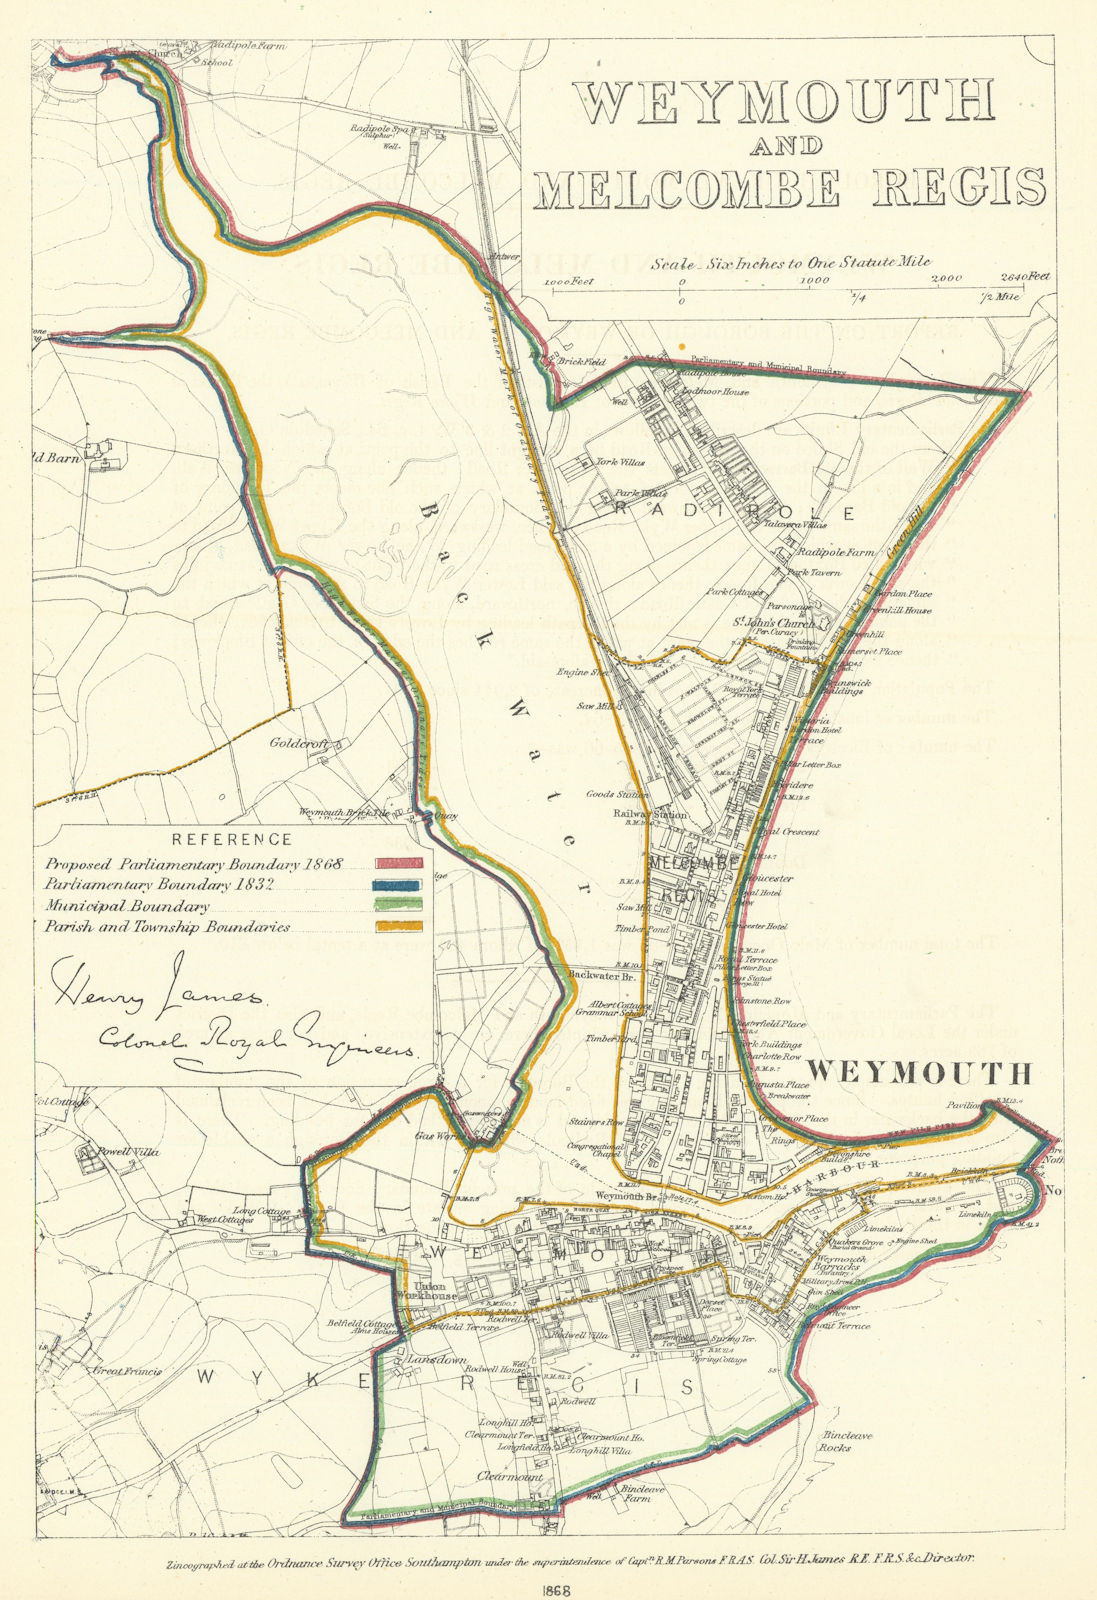 Weymouth & Melcombe Regis. JAMES. Parliamentary Boundary Commission 1868 map